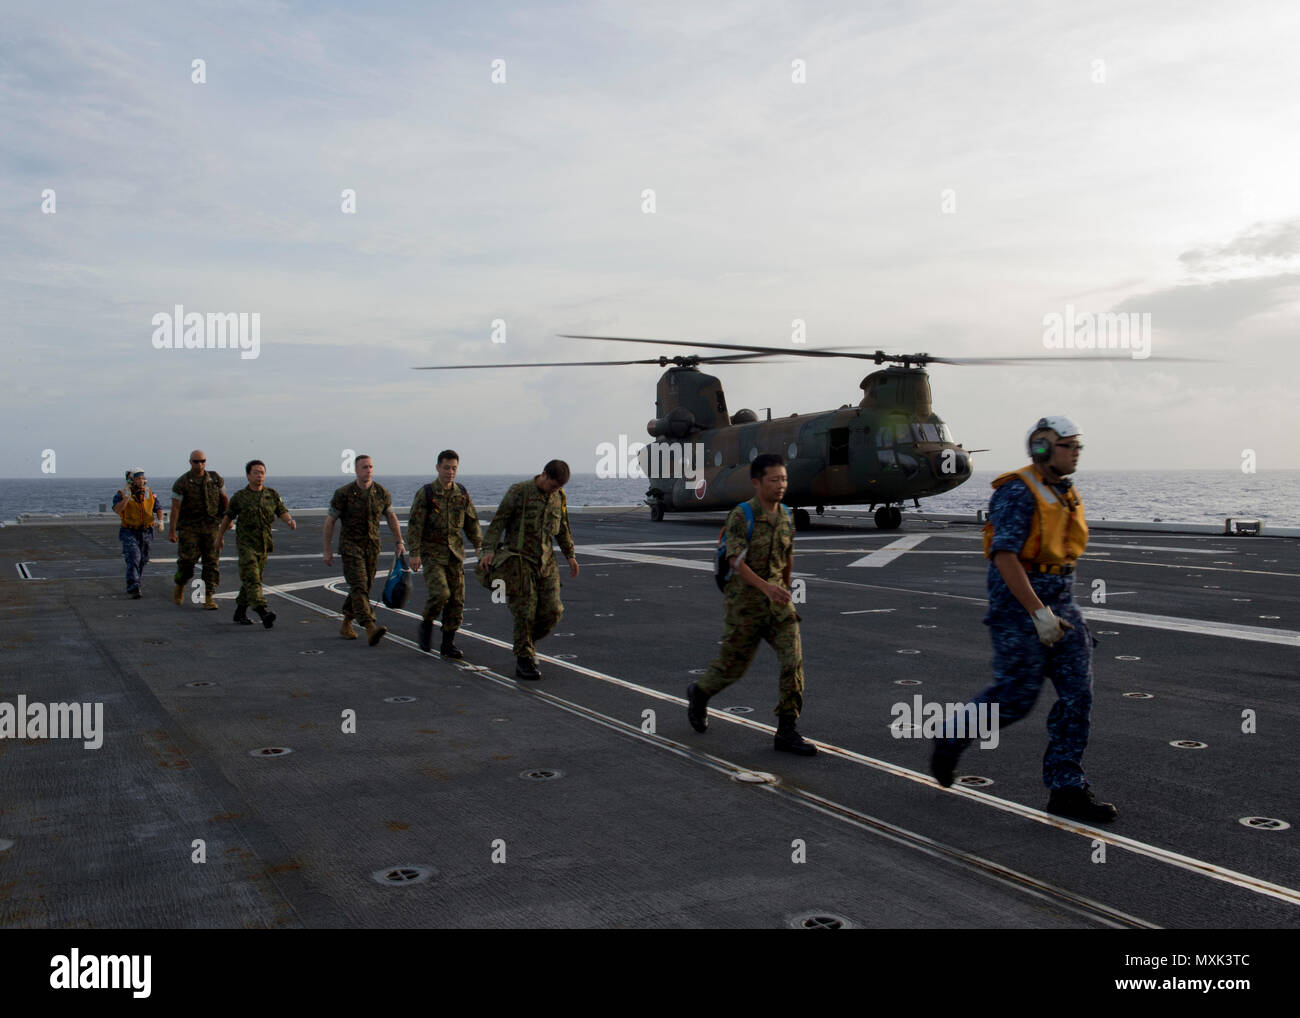 161107-N-ZK021-036 PACIFIC OCEAN (Nov. 7, 2016) - U.S. and Japanese military personnel disembark CH-47 JA helicopter during exercise Keen Sword 2017. Keen Sword 17 is a joint and bilateral field training exercise (FTX) between U.S. and Japanese forces meant to increase readiness and interoperability within the framework of the U.S. – Japan alliance. (U.S. Navy photo by Petty Officer First Class Nardel Gervacio/Released) Stock Photo